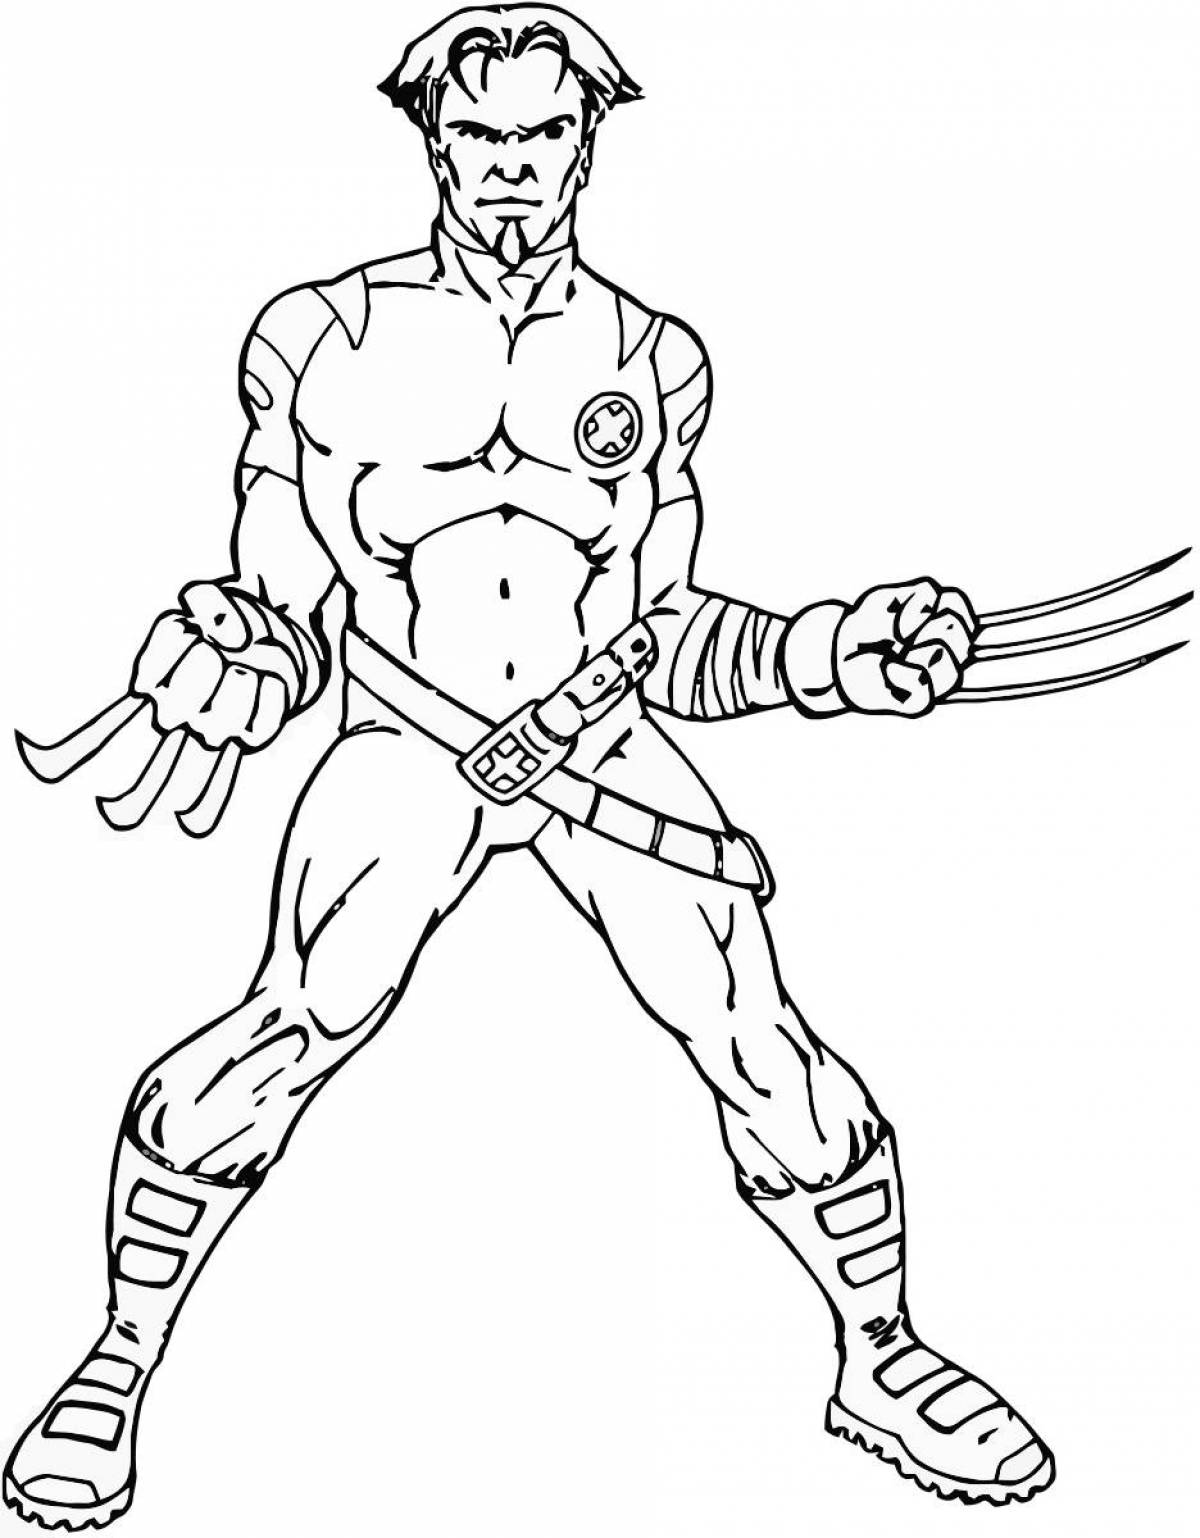 Dazzling superhero coloring pages for boys